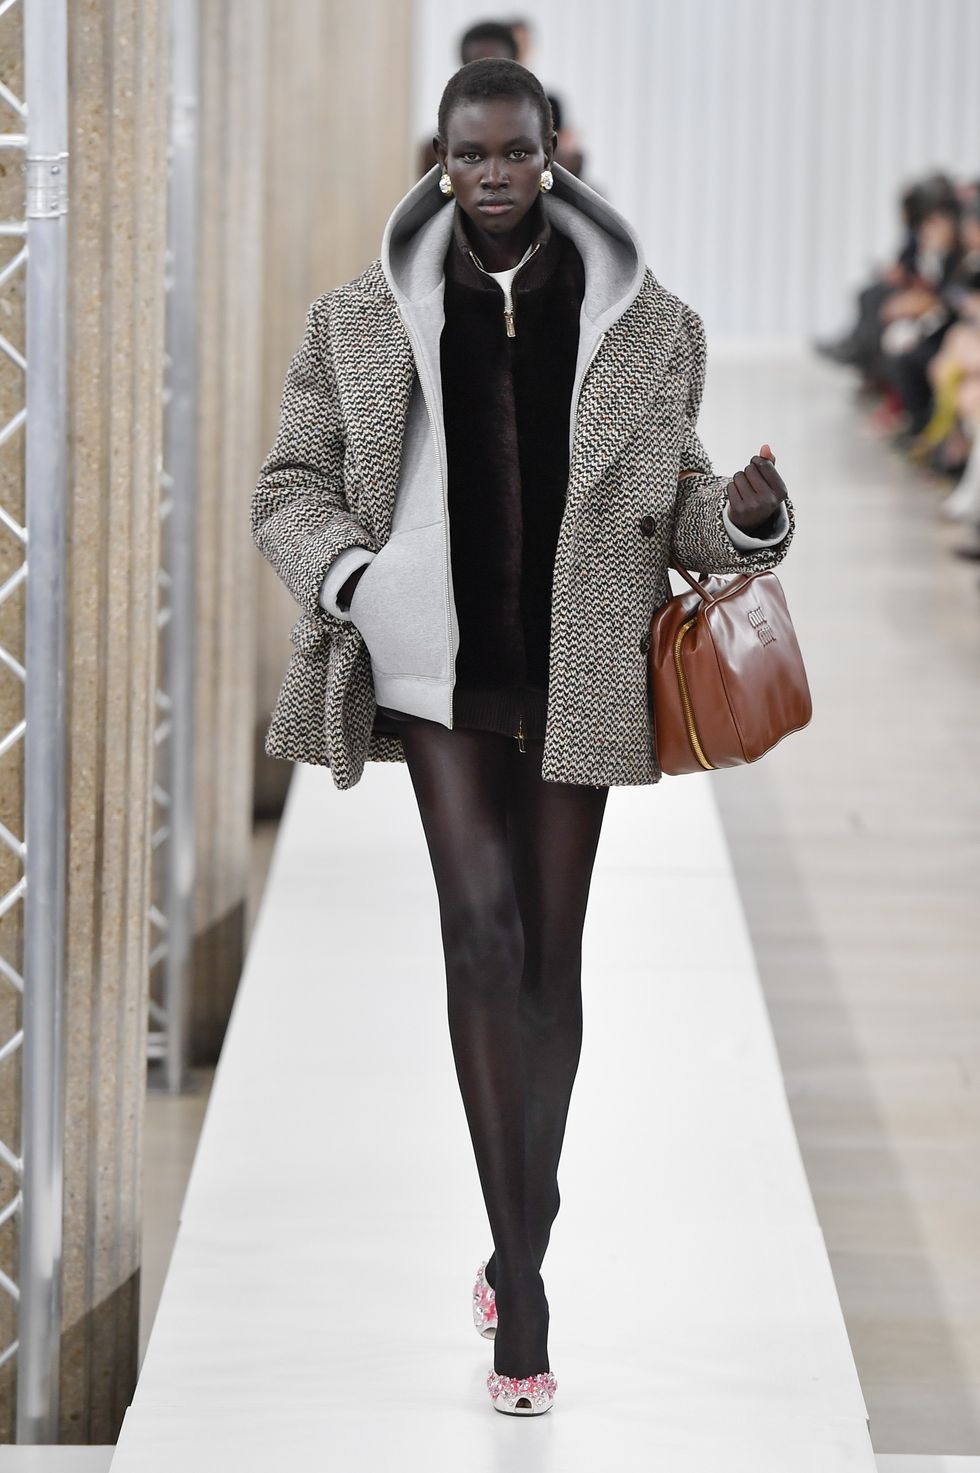 paris, france march 07 a model walks the runway during the miu miu ready to wear fallwinter 2023 2024 fashion show as part of the paris fashion week on march 7, 2023 in paris, france photo by victor virgilegamma rapho via getty images